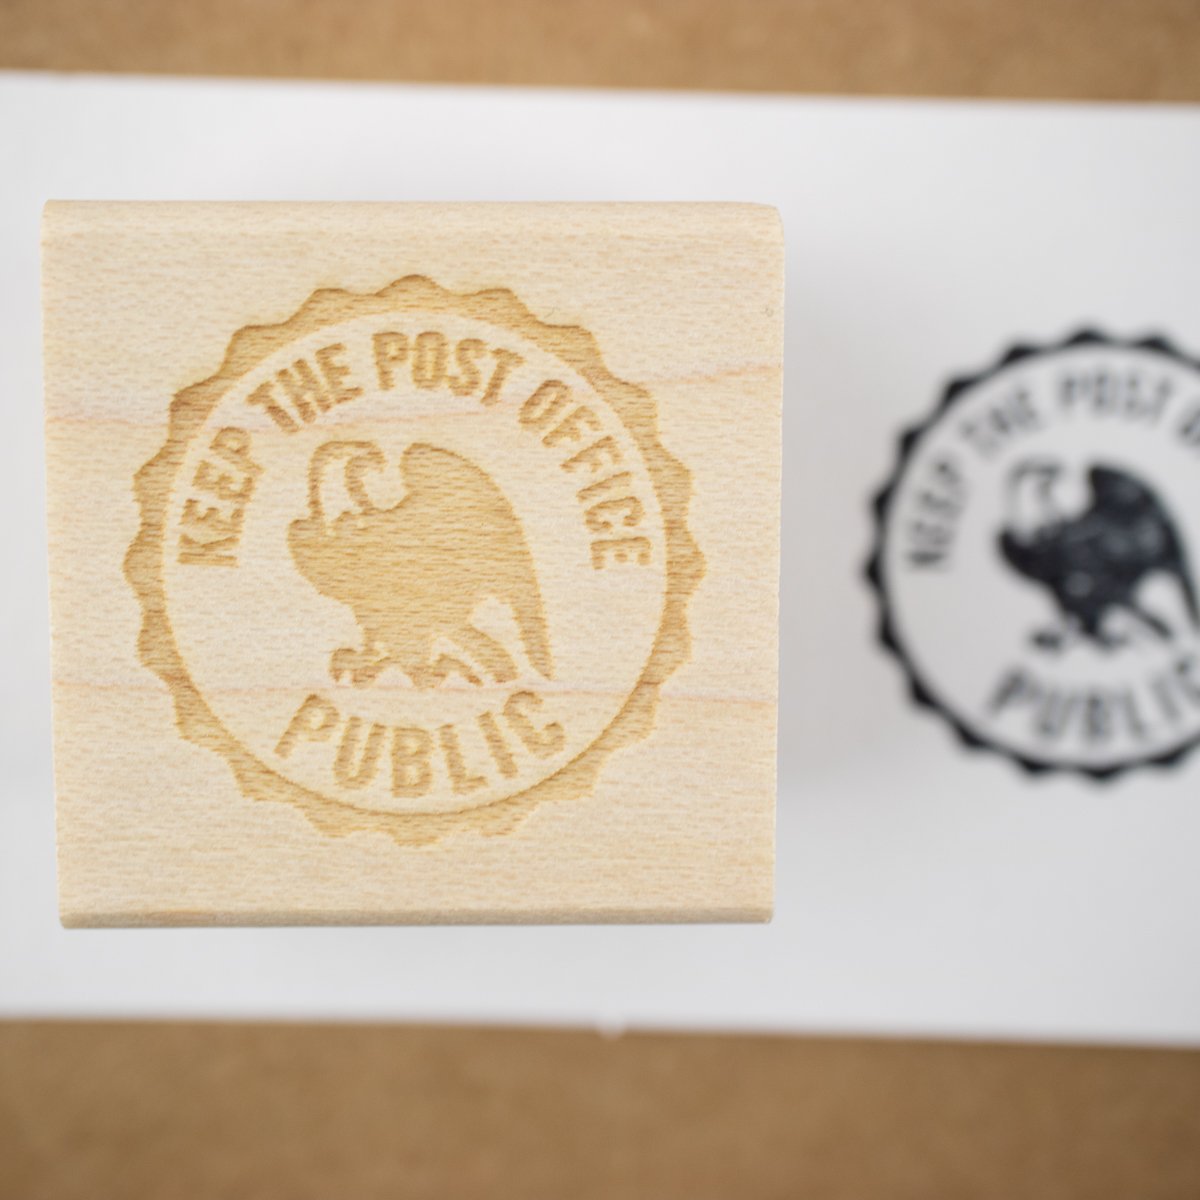 "Keep The Post Office Public" (Eagle) Rubber Stamp